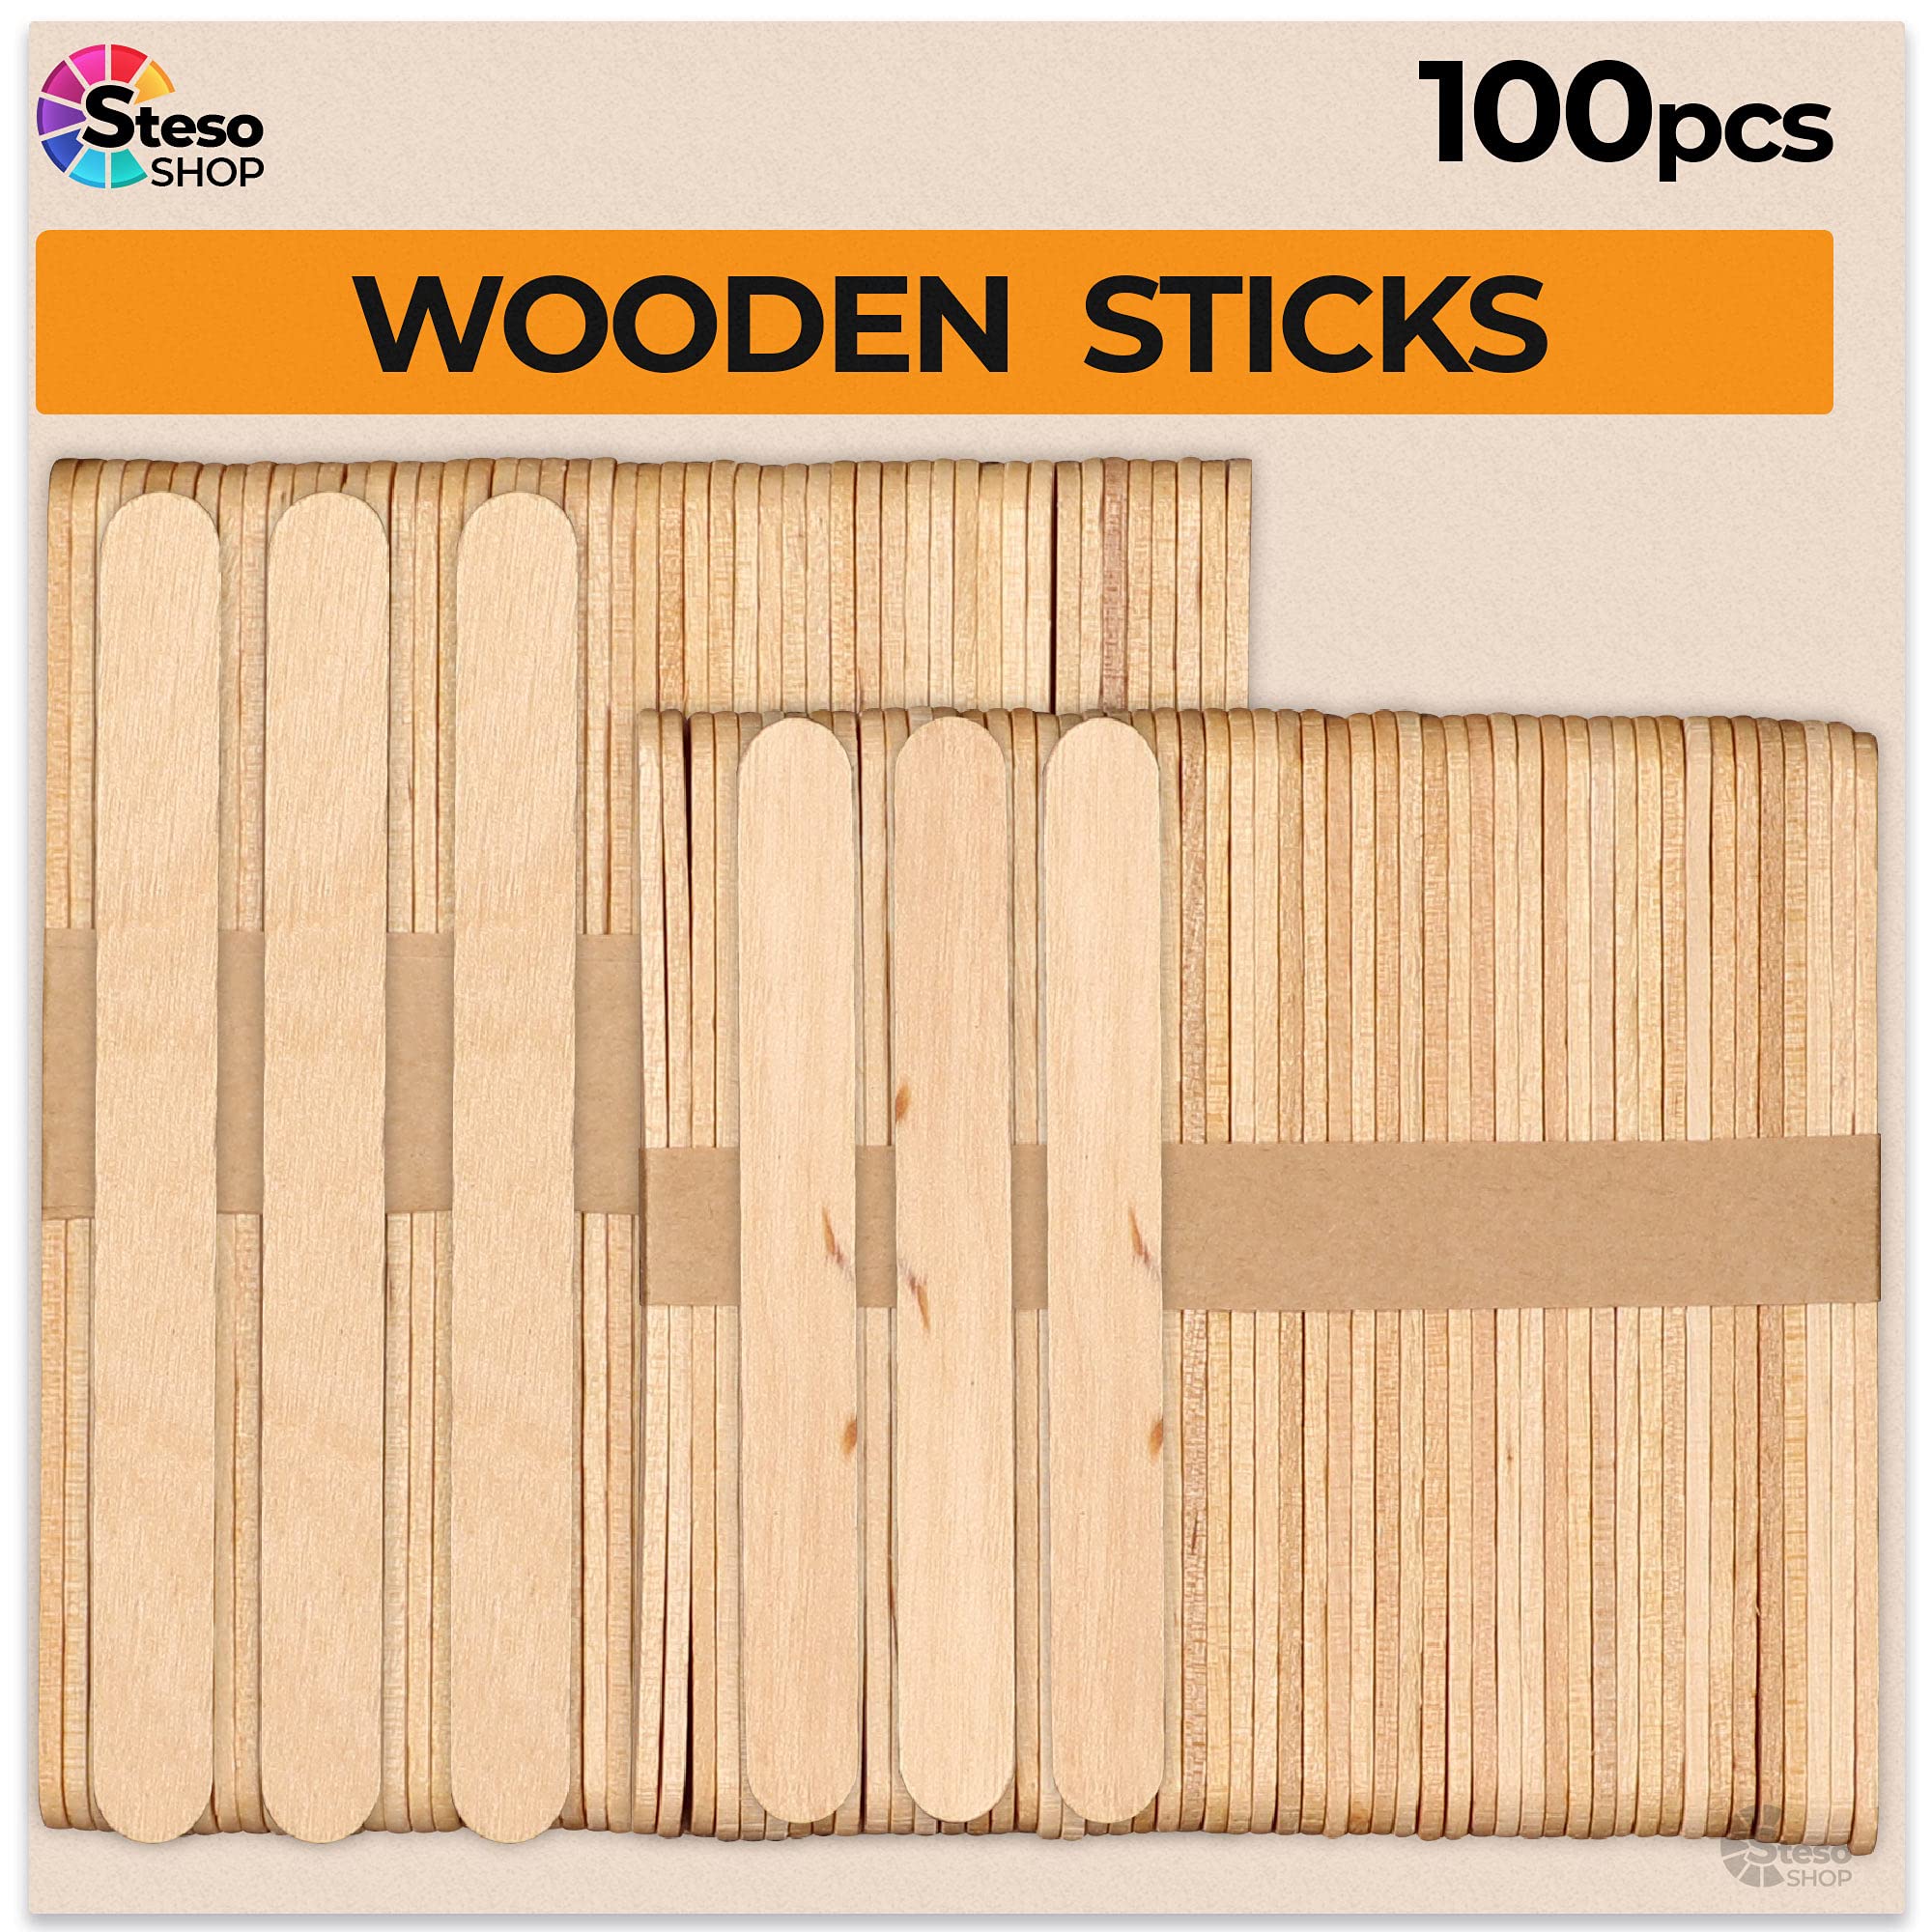 100Pcs Craft Sticks Wooden Popsicle Sticks Ice Cream Stick Premium Natural Wood  Popsicle Stick Lolly Sticks for DIY Crafts, Home Art Projects 